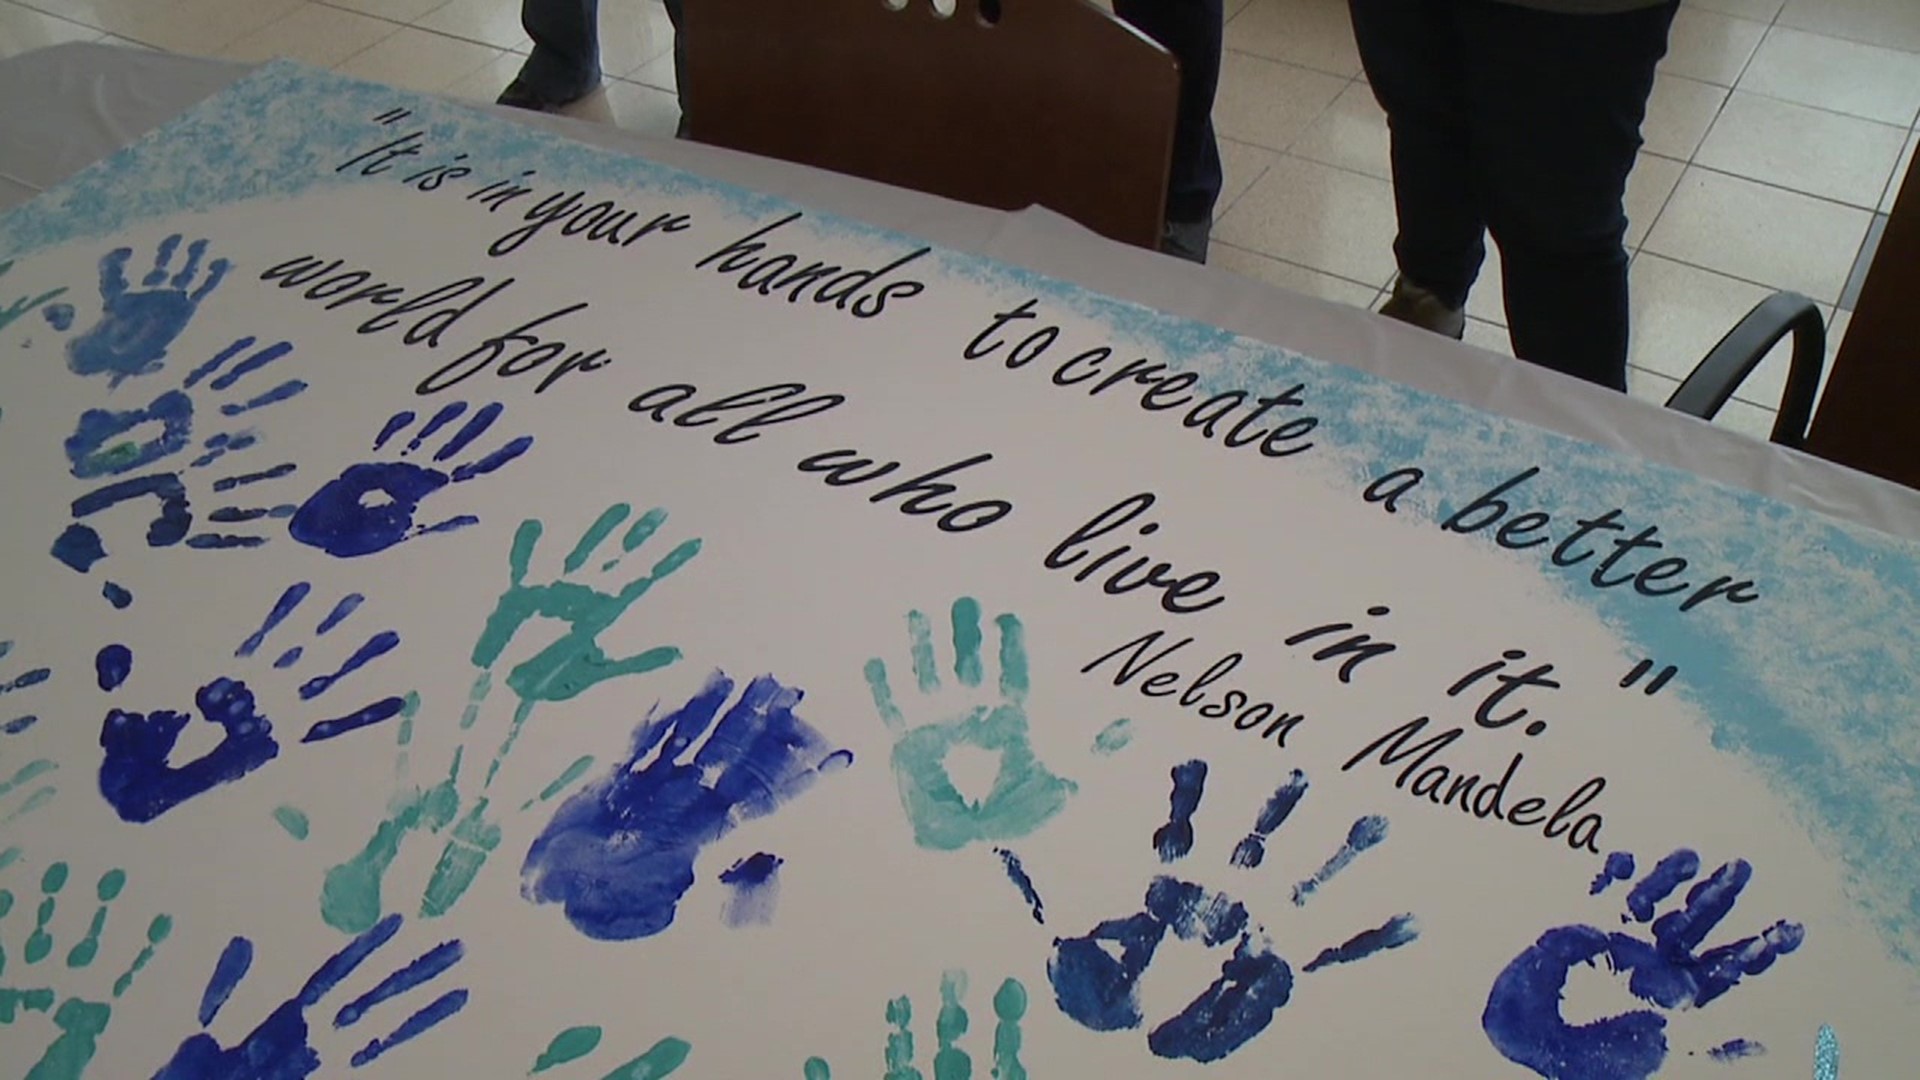 With the ongoing war in Ukraine, Luzerne County Community College's annual tradition took on extra meaning this year.